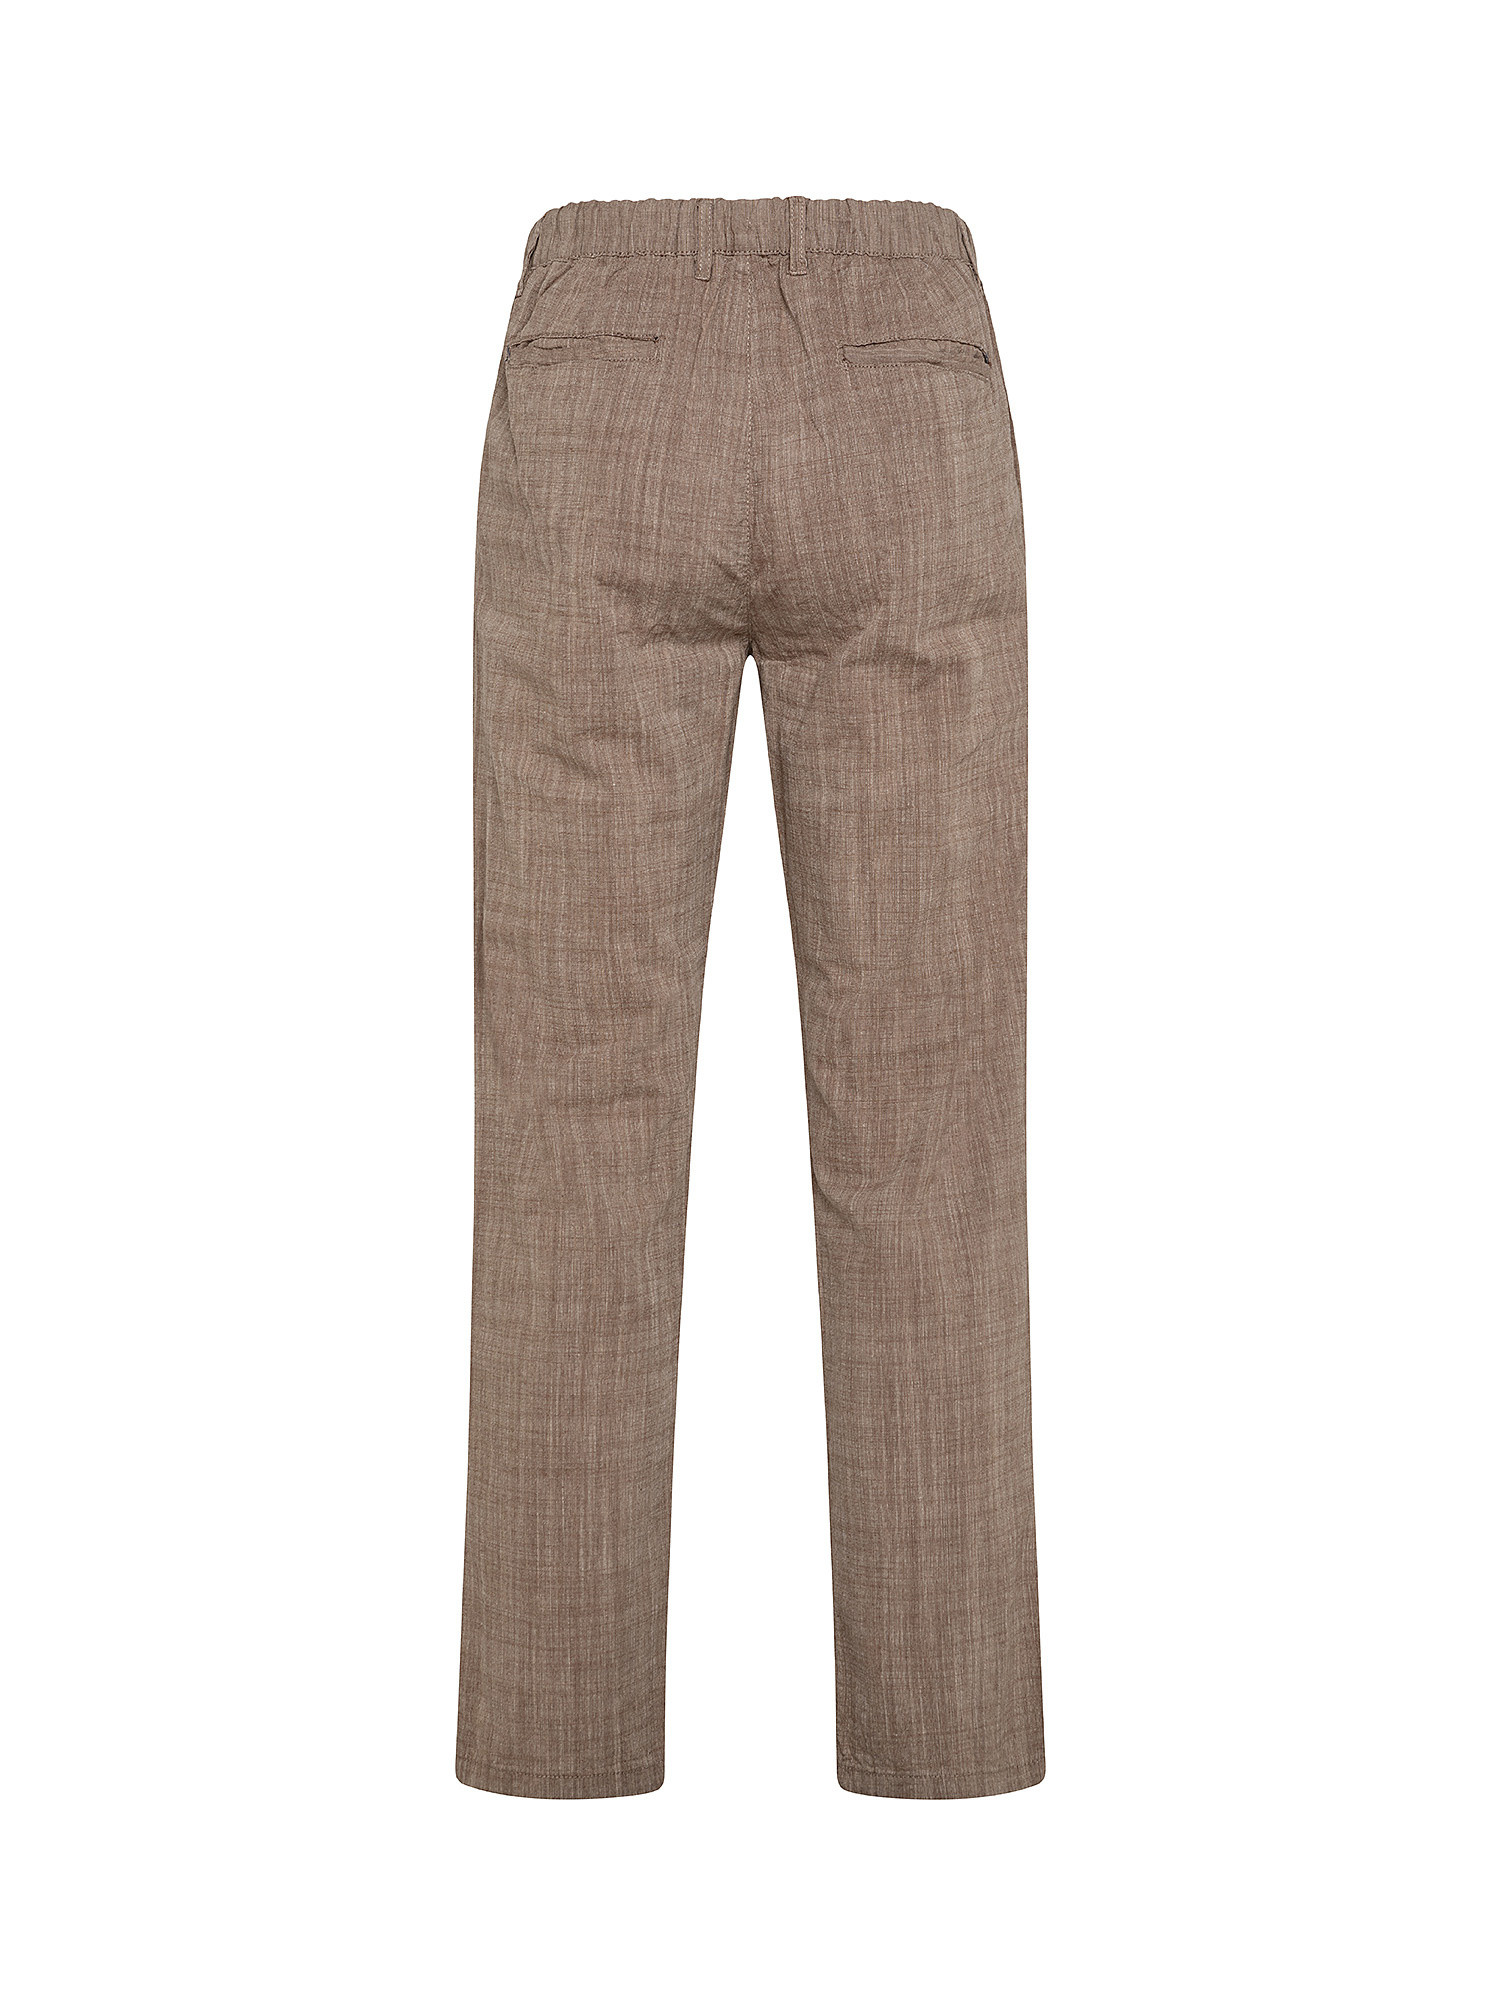 Trousers with drawstring, Beige, large image number 1